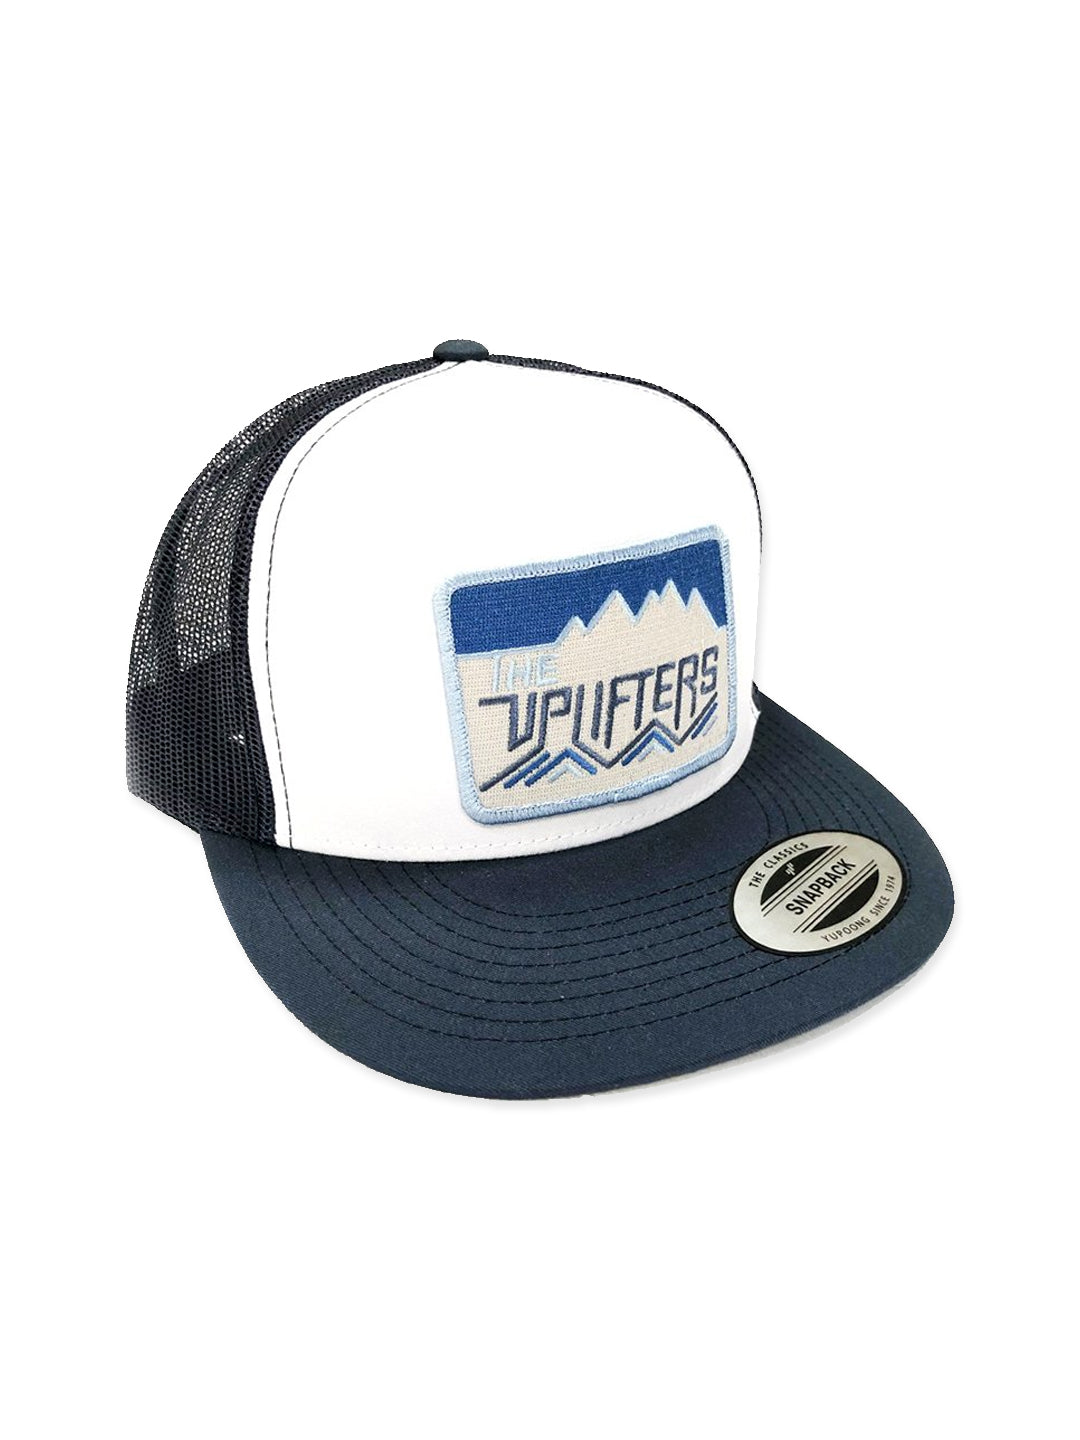 The Uplifters Signature Trucker